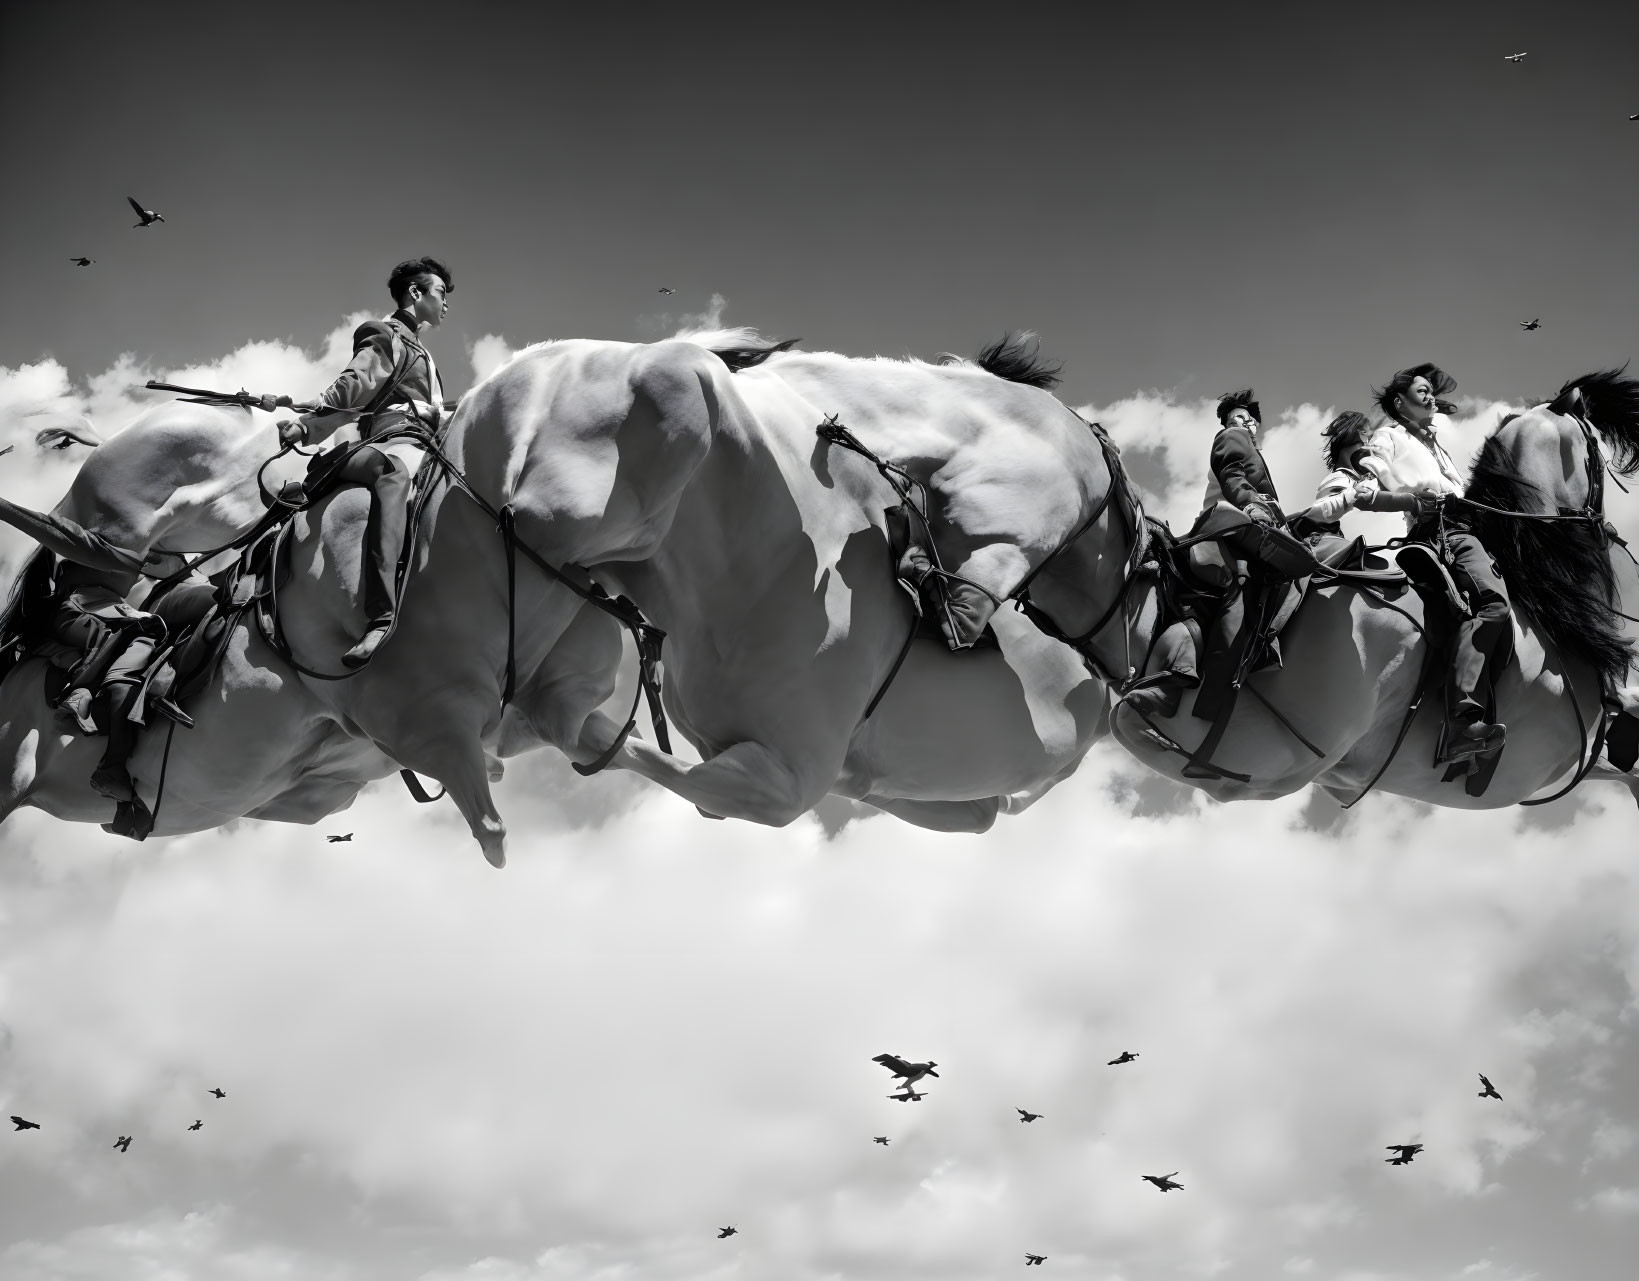 Monochromatic image of three horses and riders mid-jump with birds in the sky